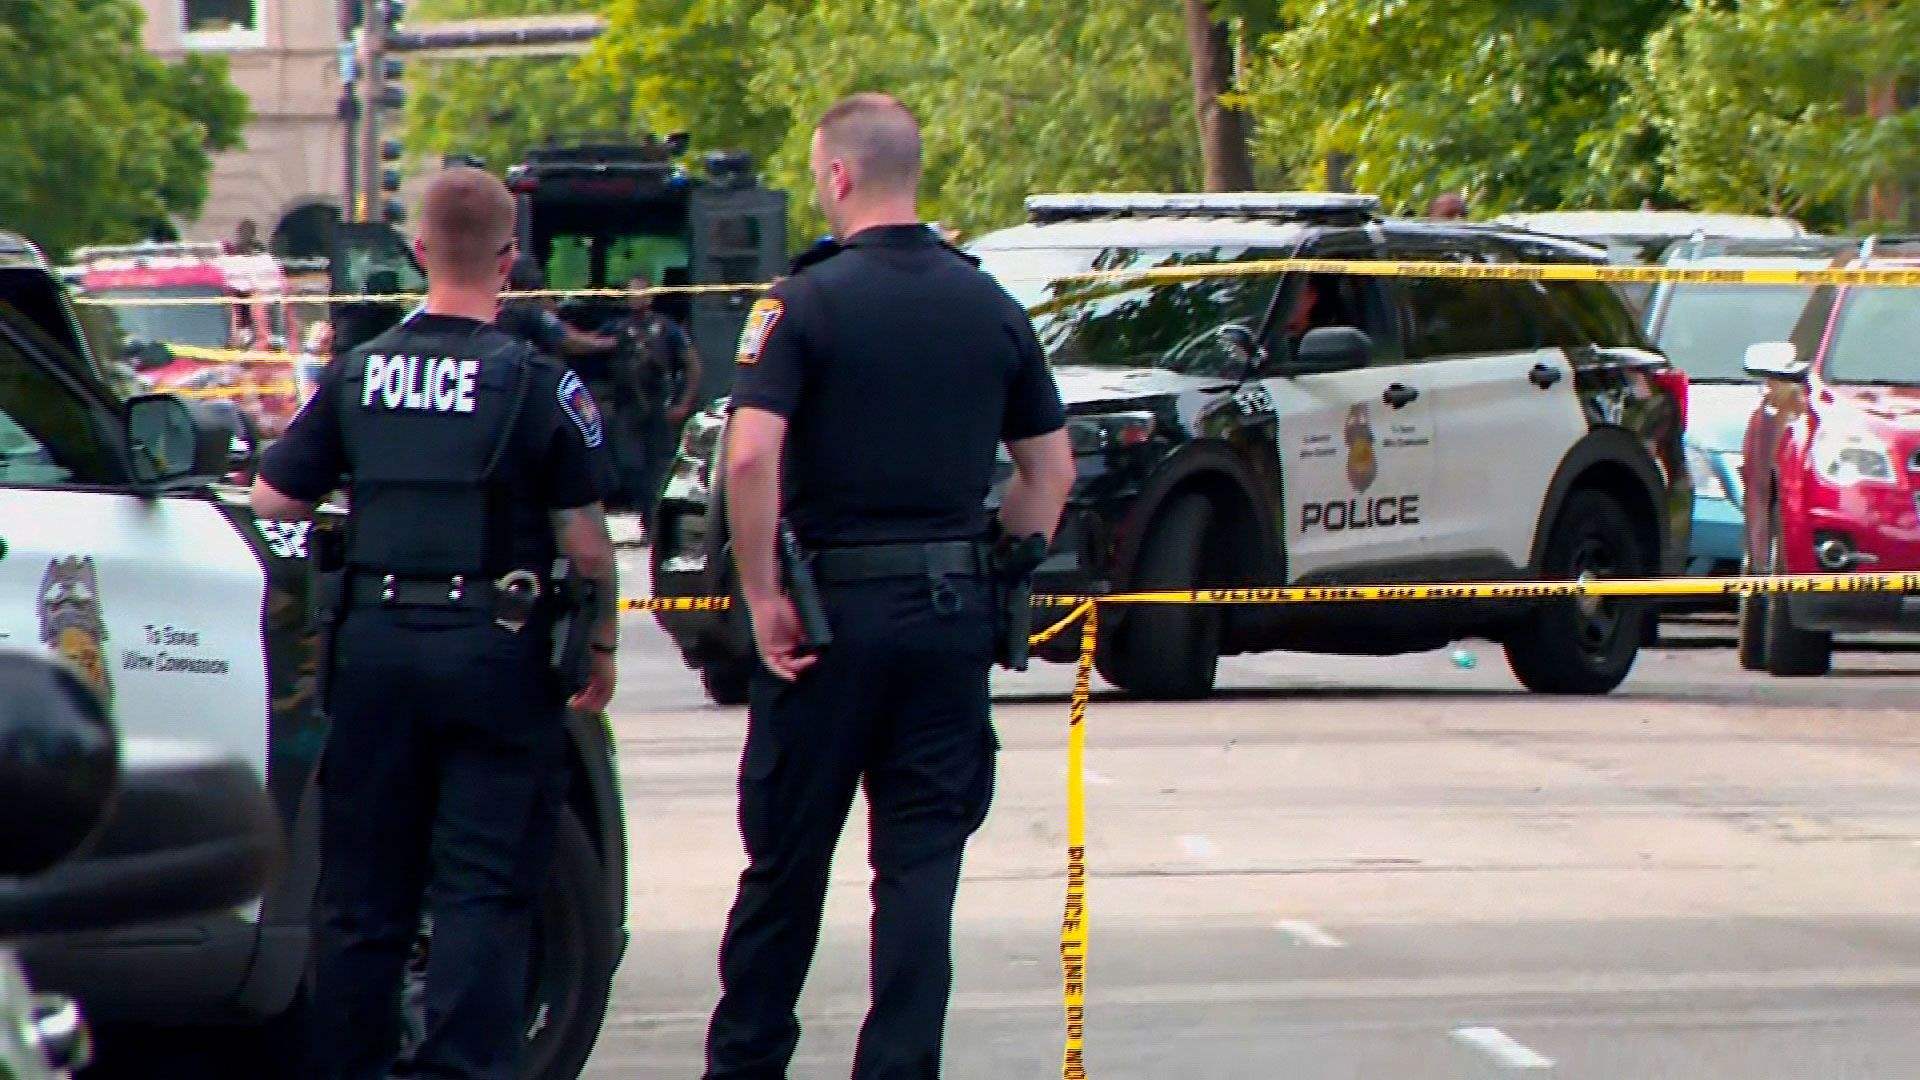 Police officer among three killed in Minneapolis shooting